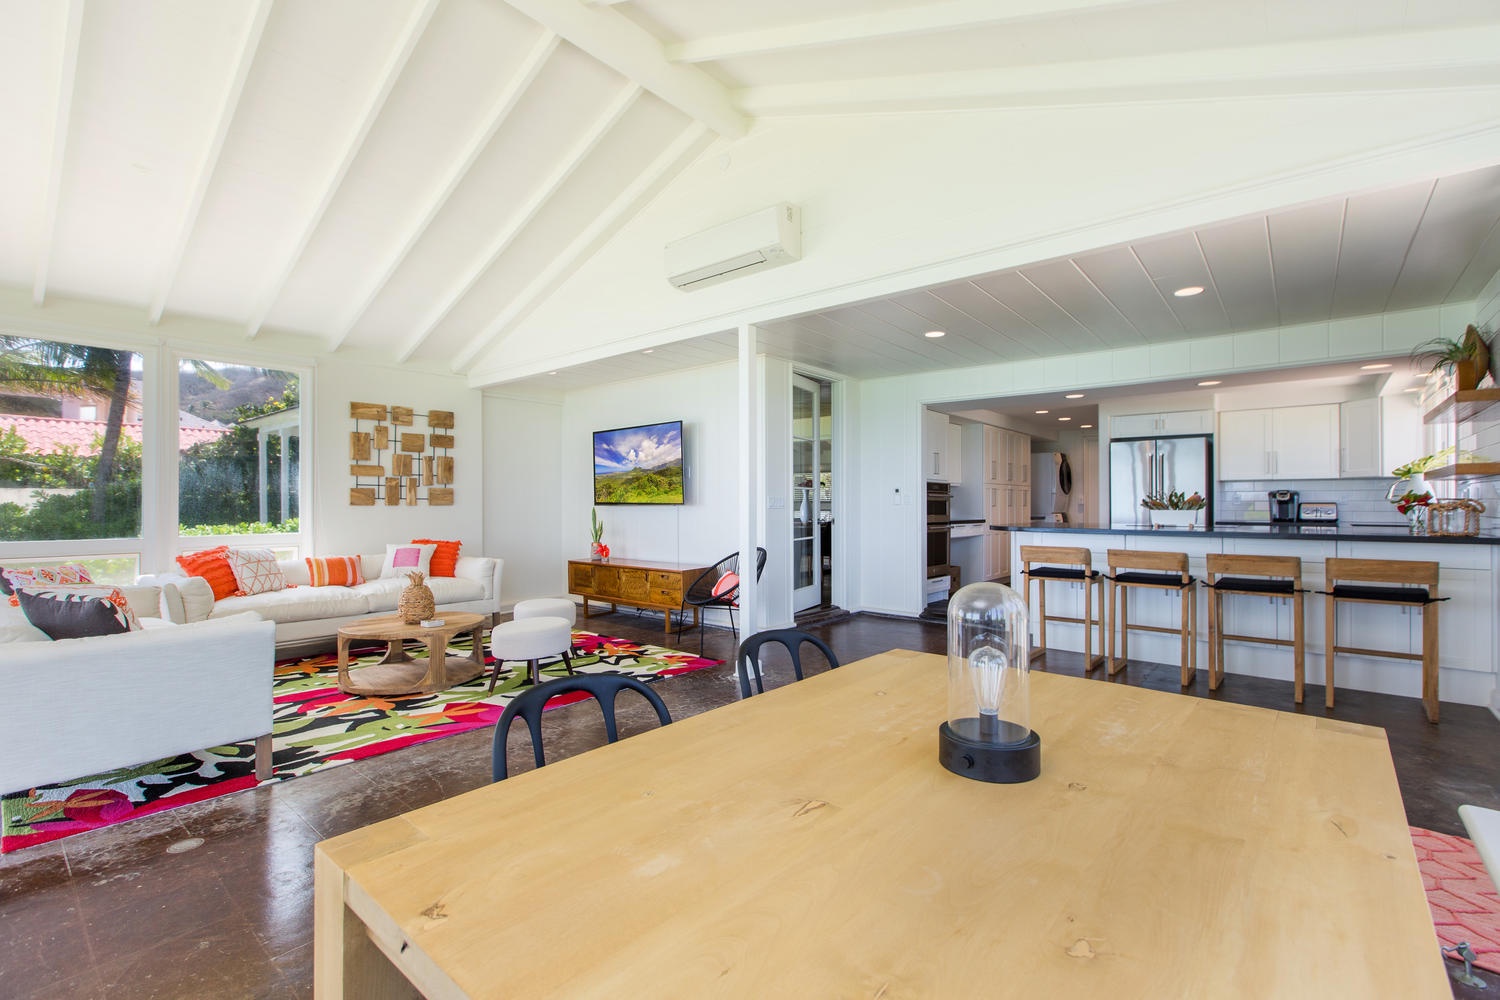 Kailua Vacation Rentals, Lanikai Oceanside 5 Bedroom - Family/living room and kitchen.